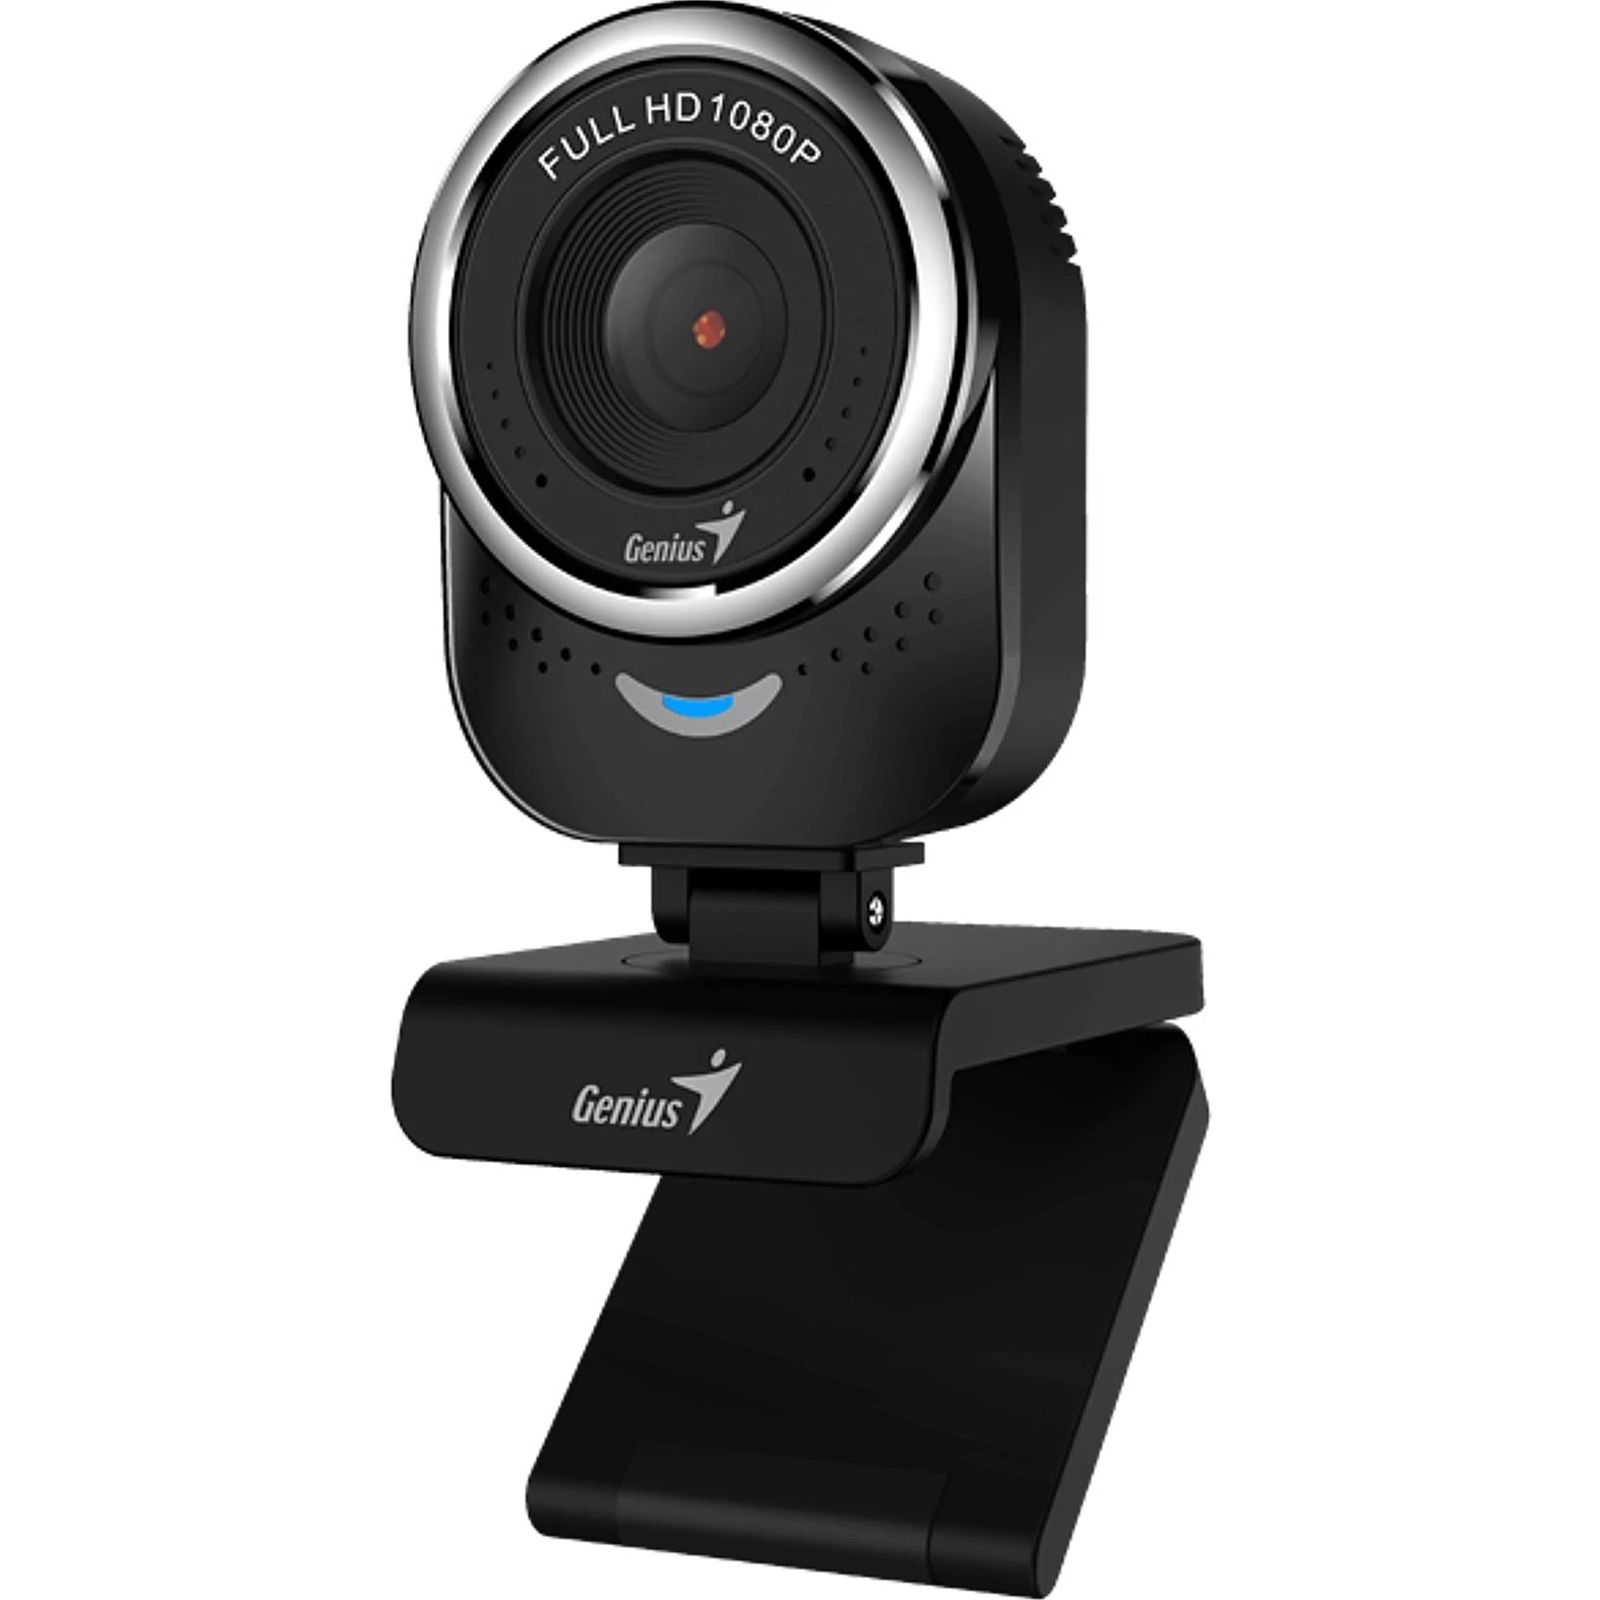 Genius QCam 6000 HD Webcam, 2MP, 1920 x 1080, True-to-life HD 1080p Video Calling with 360 Degree rotation and Built-in Microphone, For Skype, FaceTime, Hangouts, WebEx, USB Connection, Black